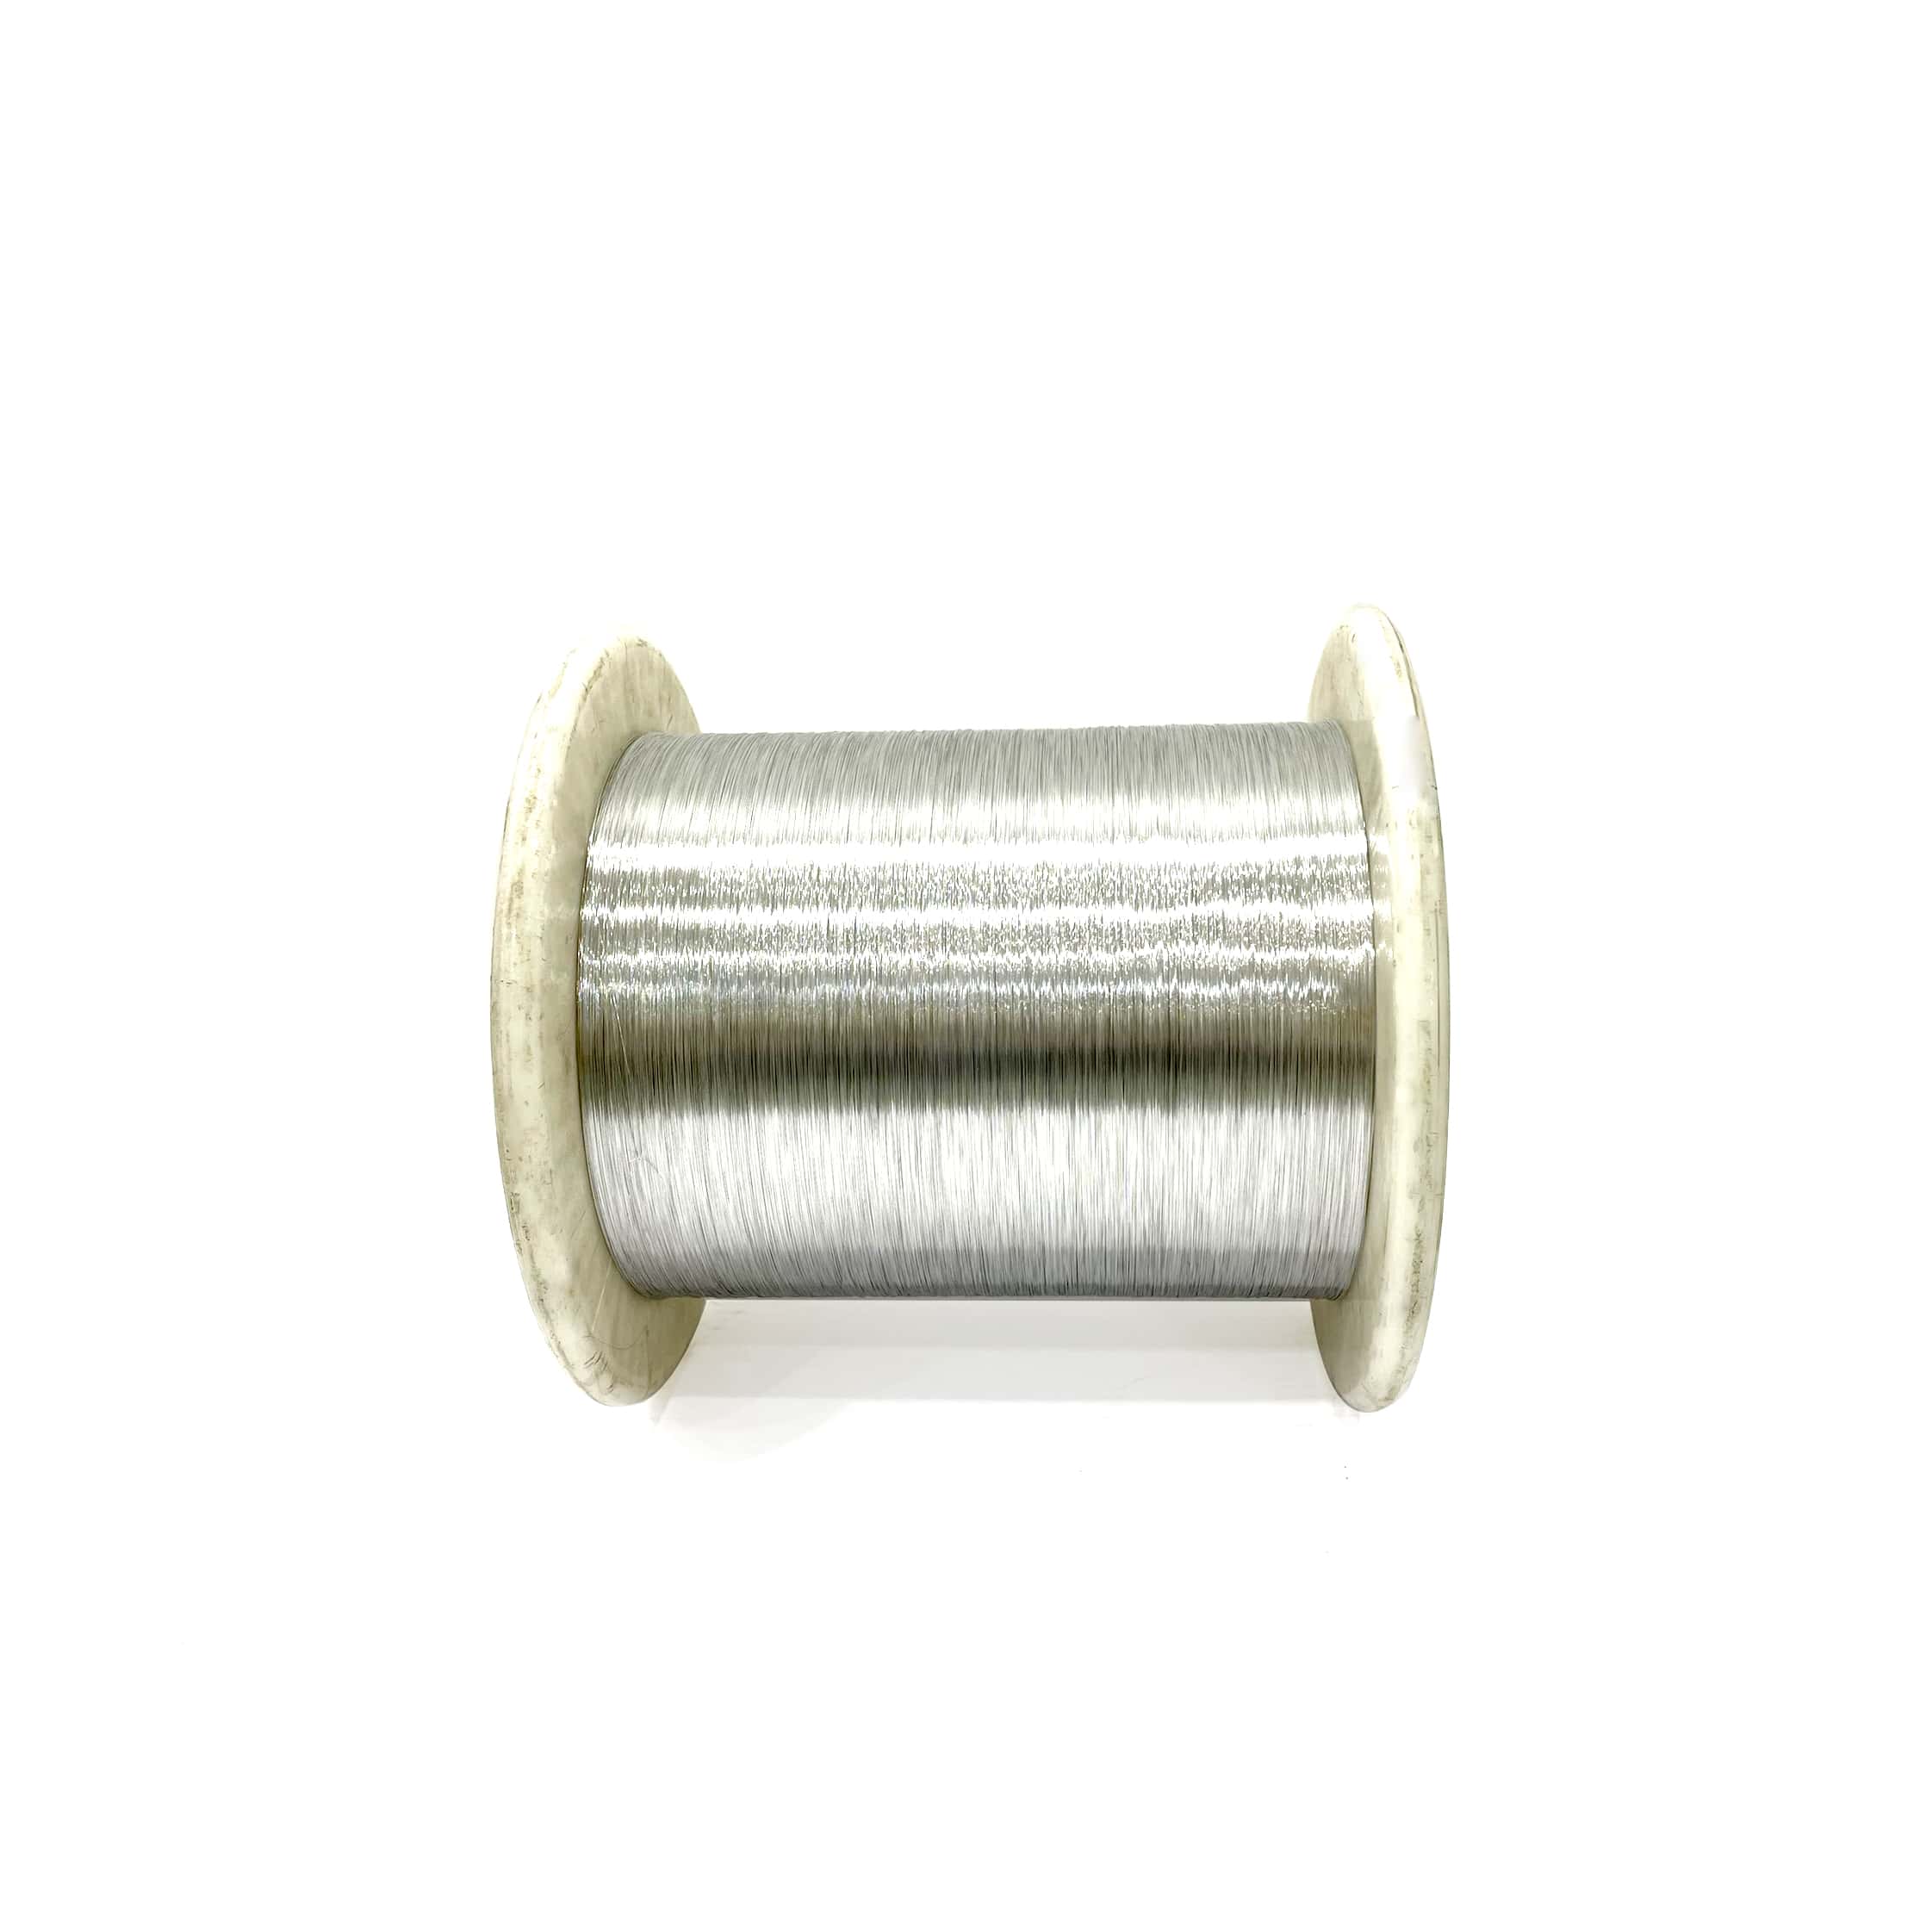 TIN-PLATED COPPER WIRE